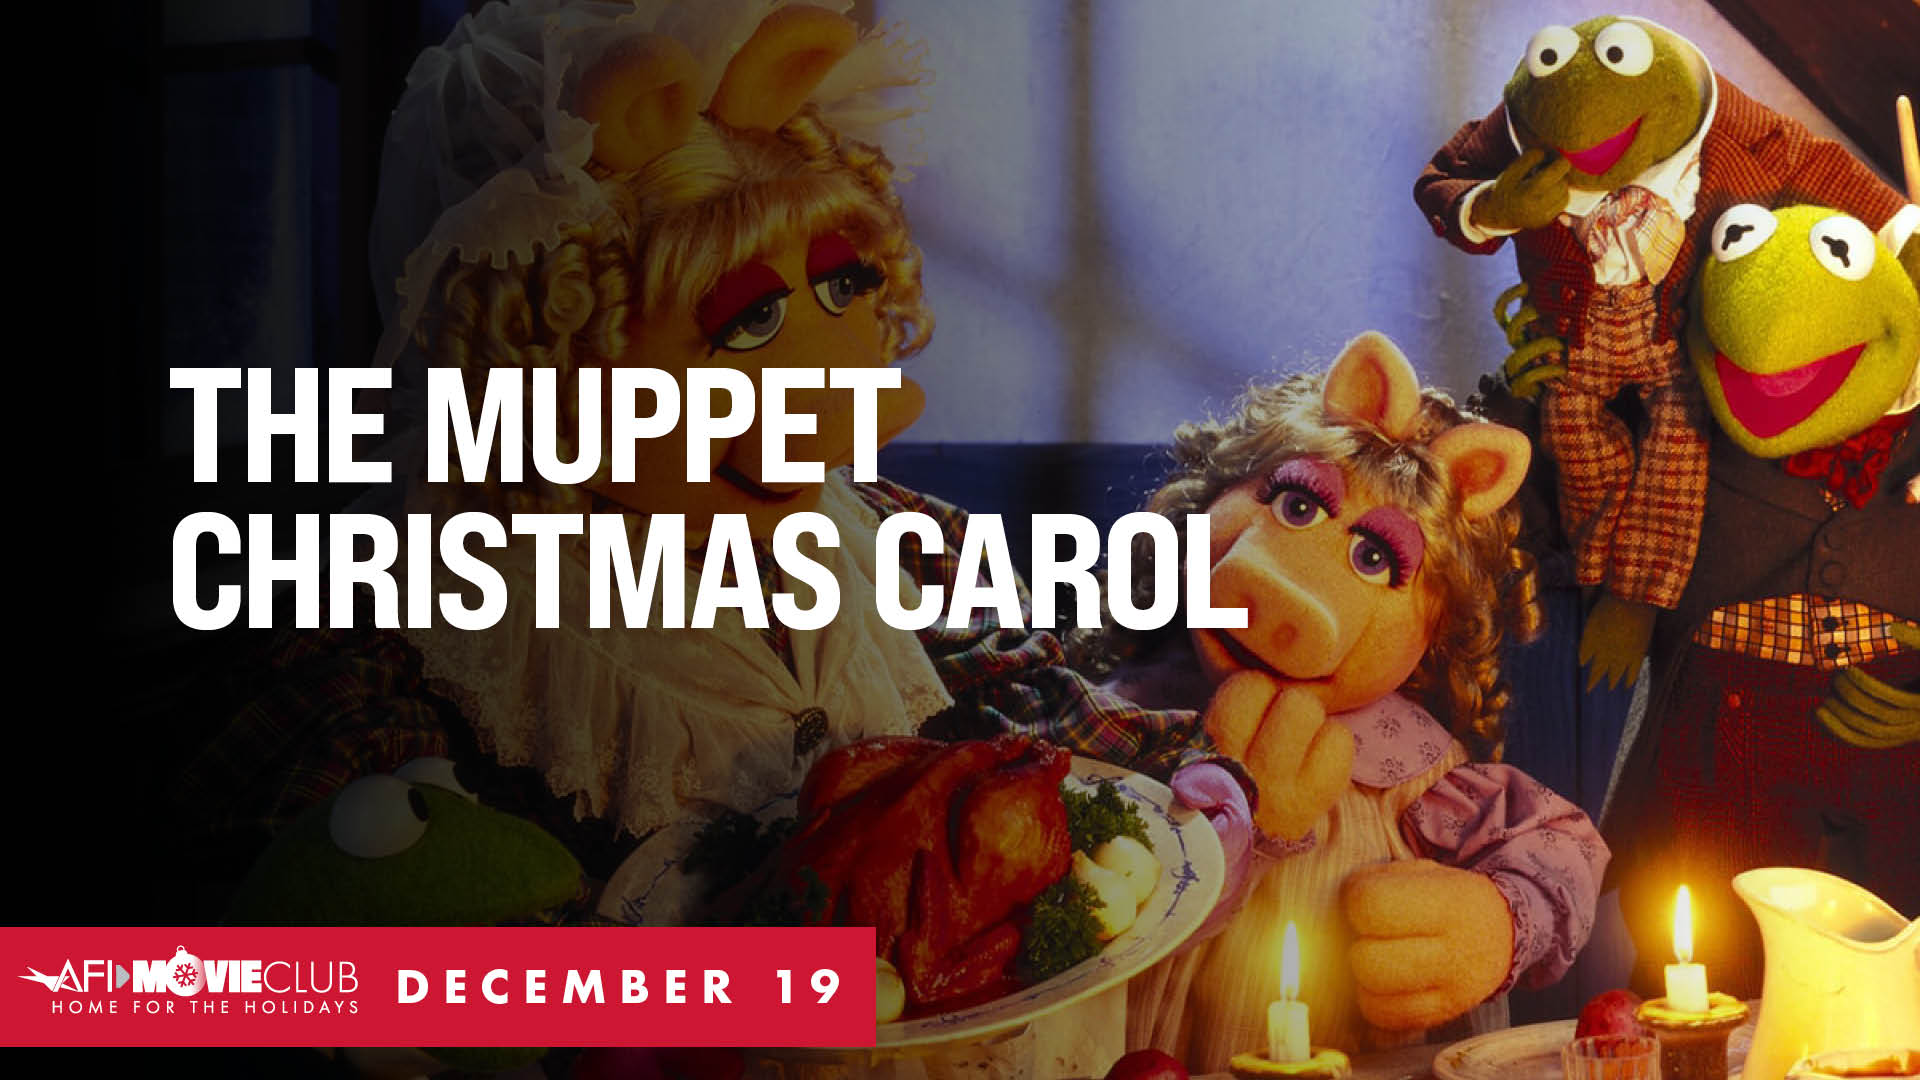 The Muppet Christmas Carol Film Still - Kermit the Frog and Miss Piggy